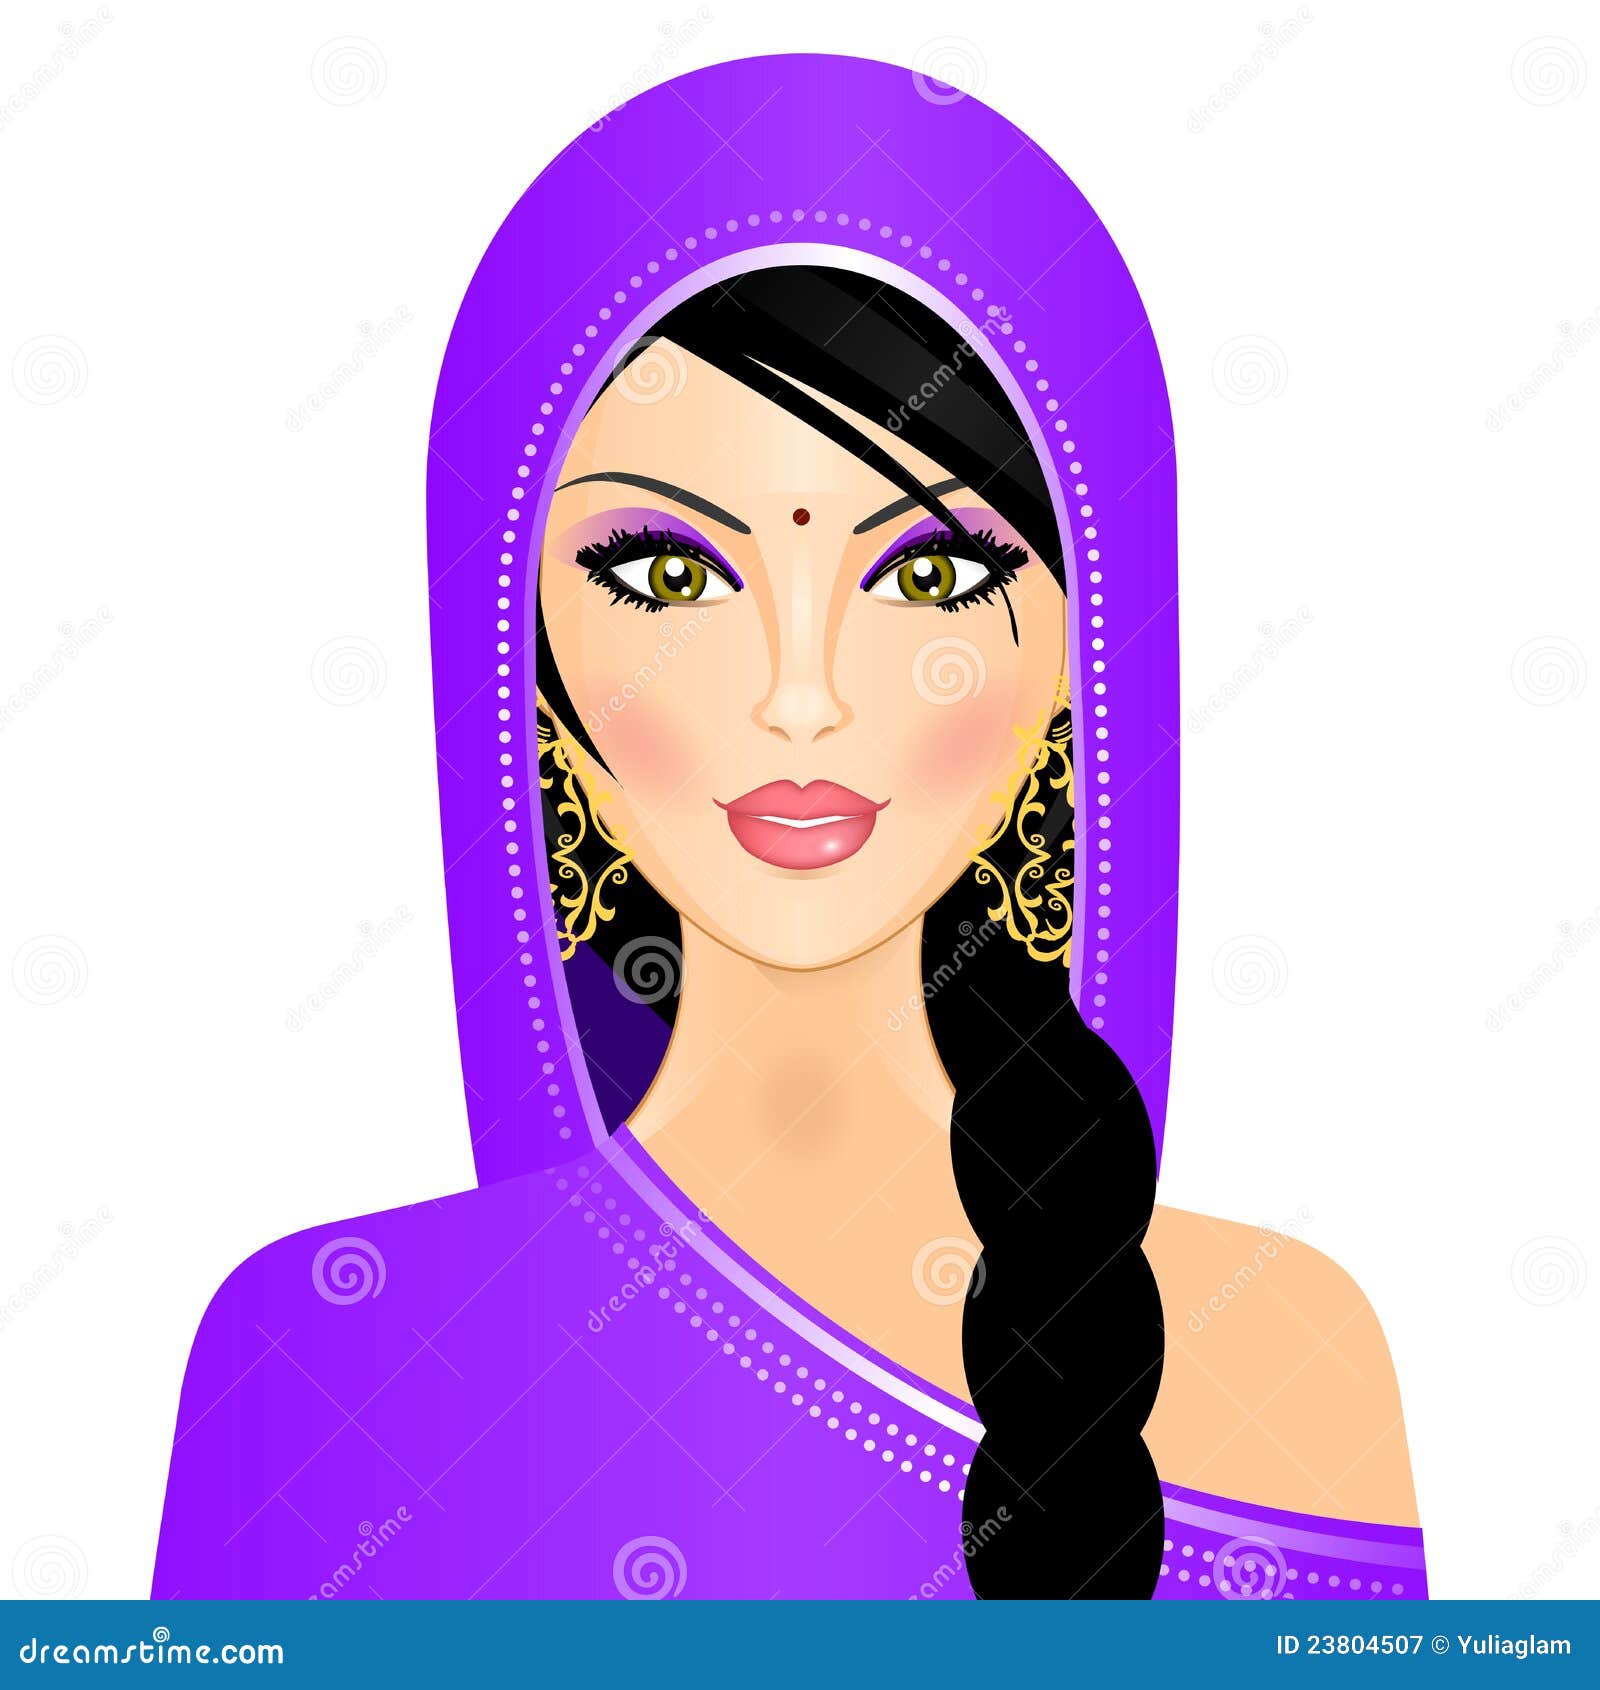 Download Indian woman stock vector. Illustration of girl, accessories - 23804507